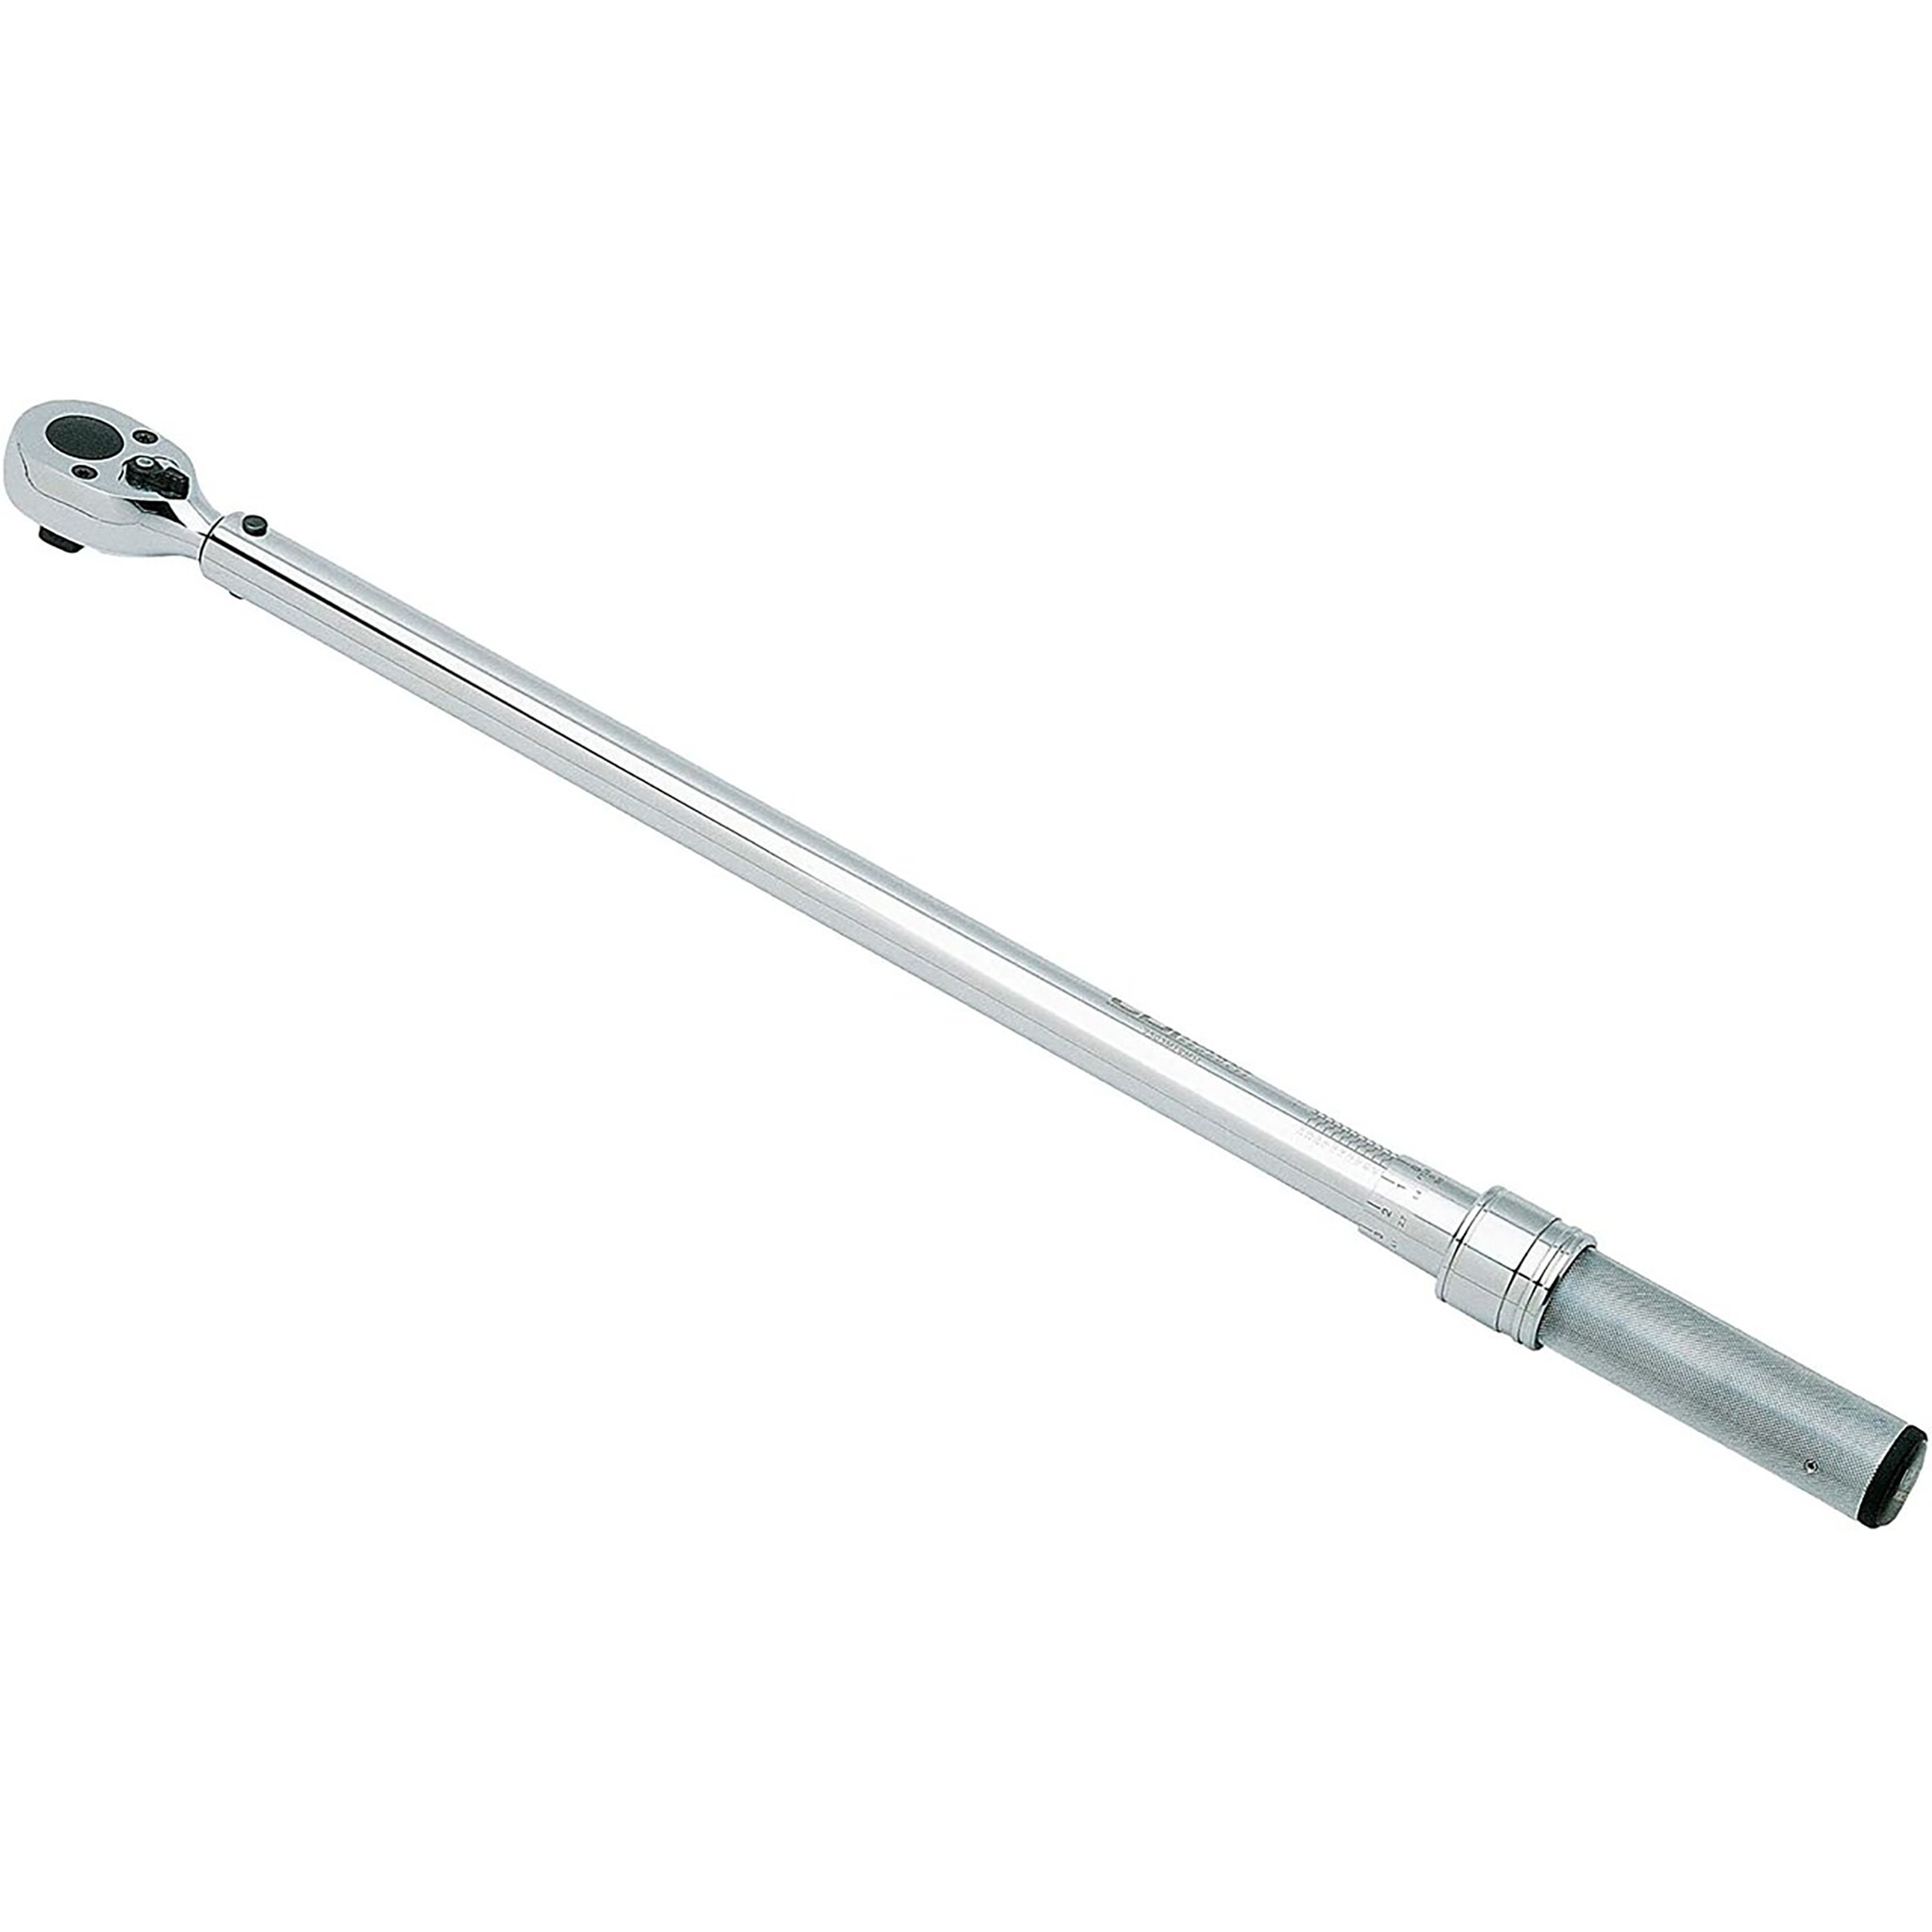 Snap-on Industrial Brands Torque Wrench, 3/8", 20-150in.lb (2.8-15.3Nm)